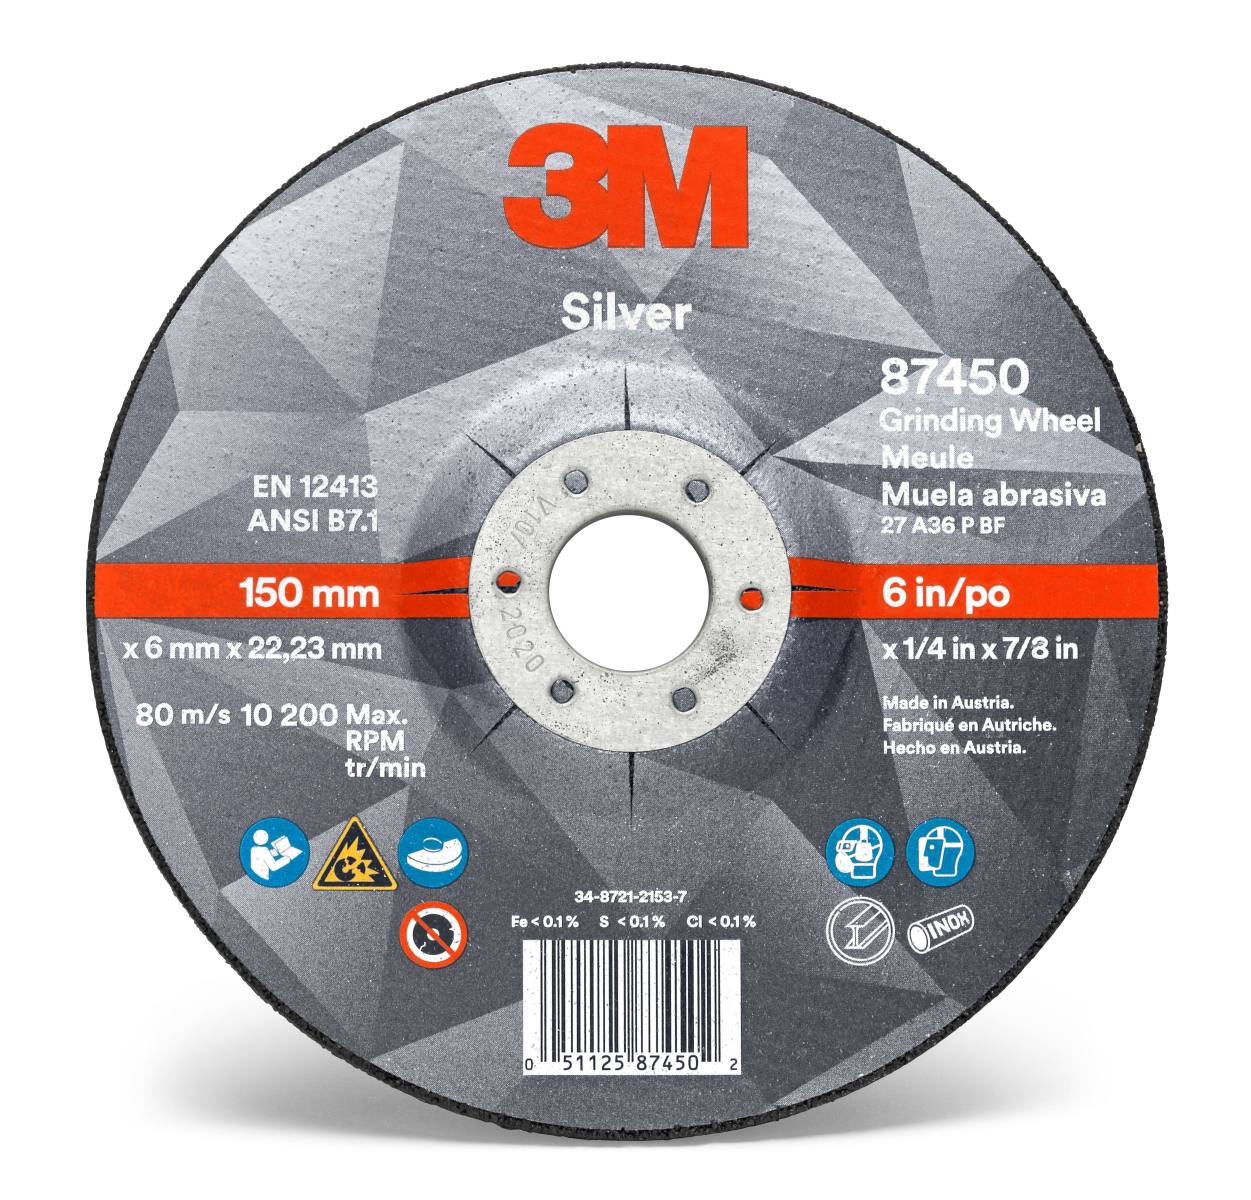 3M Silver grinding disc, 100 mm, 7.0 mm, 16 mm, type 27